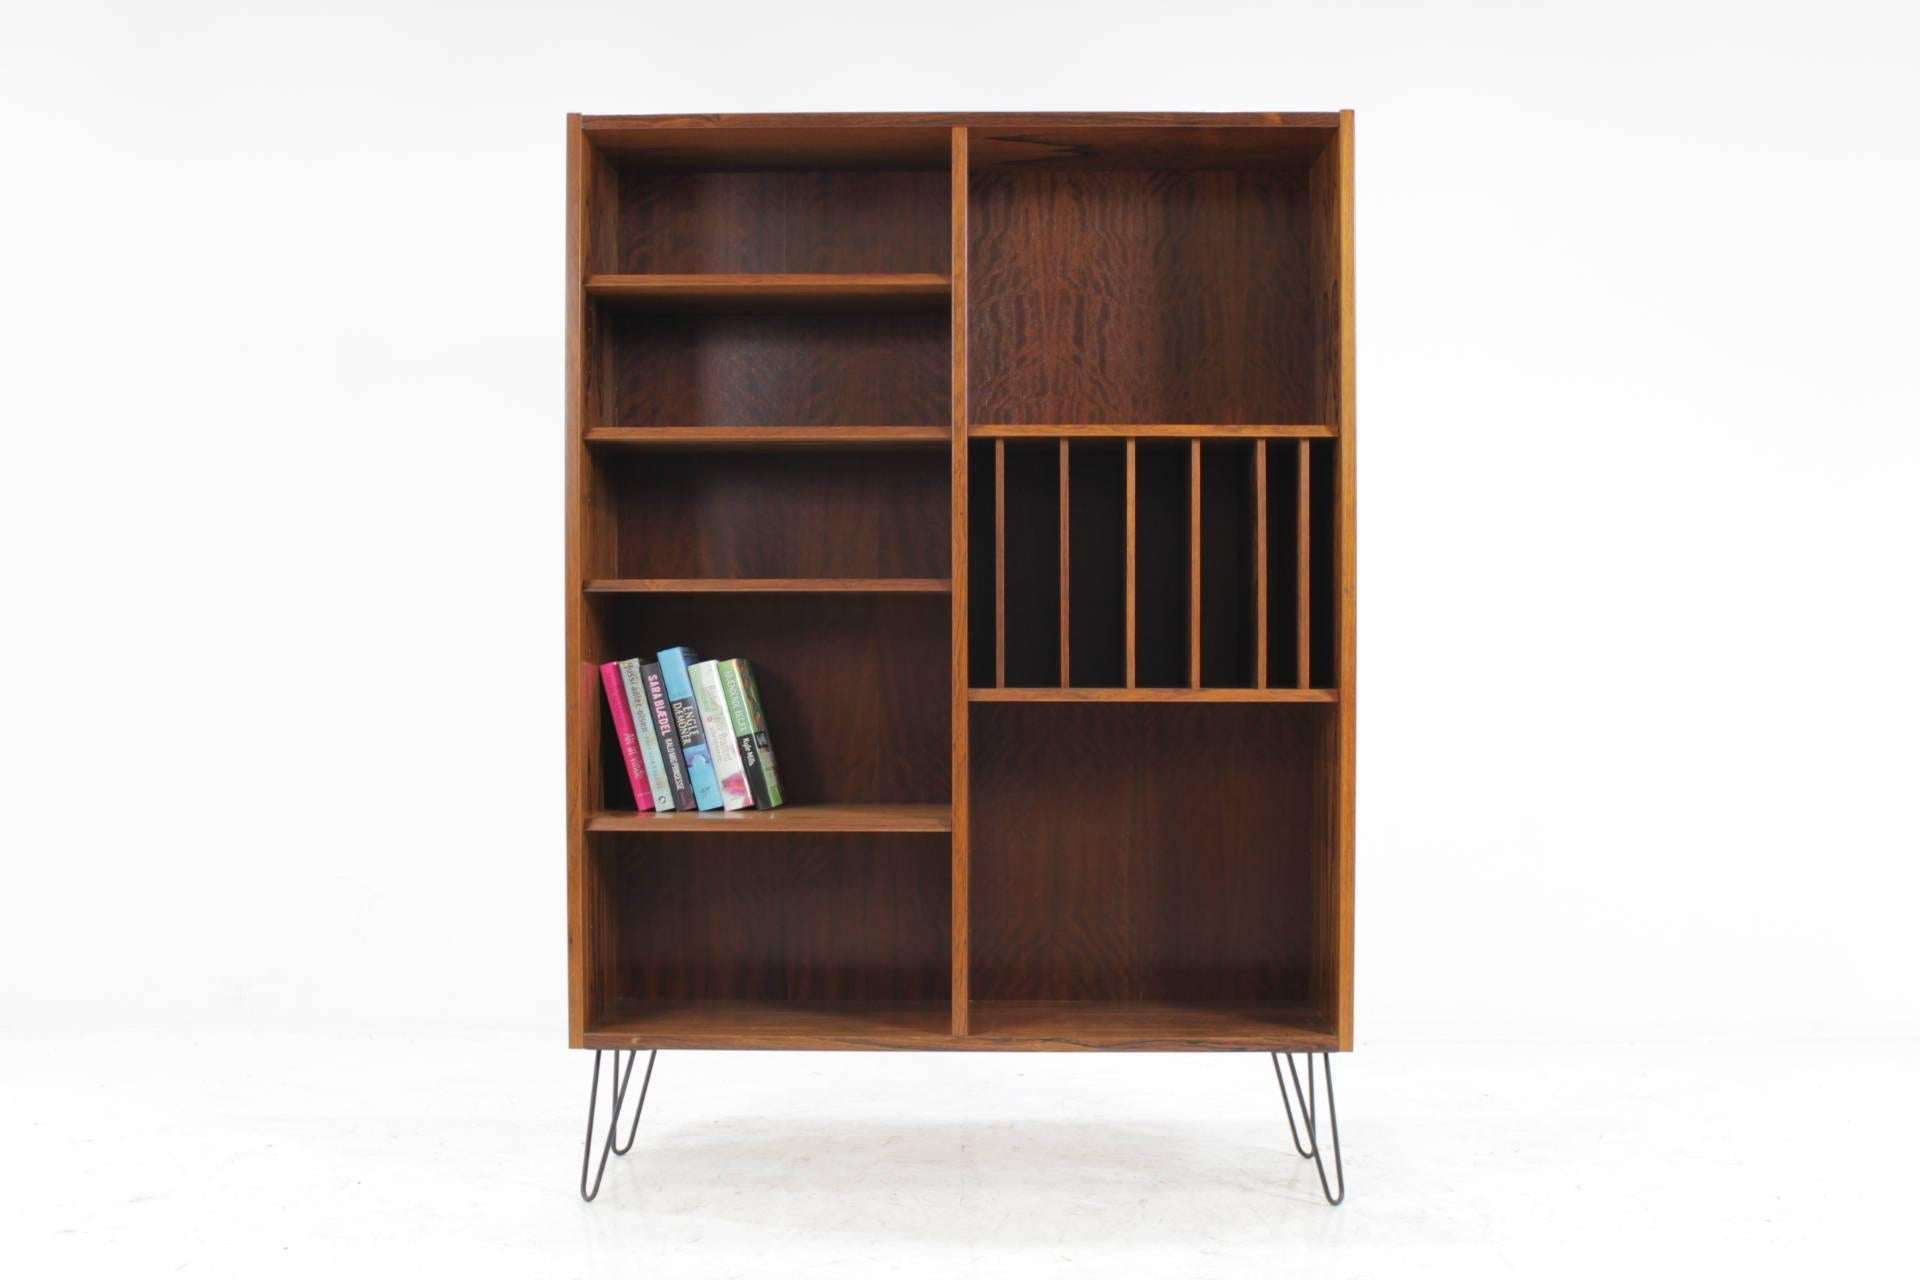 This bookcase was carefully restored. The hairpin iron legs were added afterwards. All shelves are adjustable.